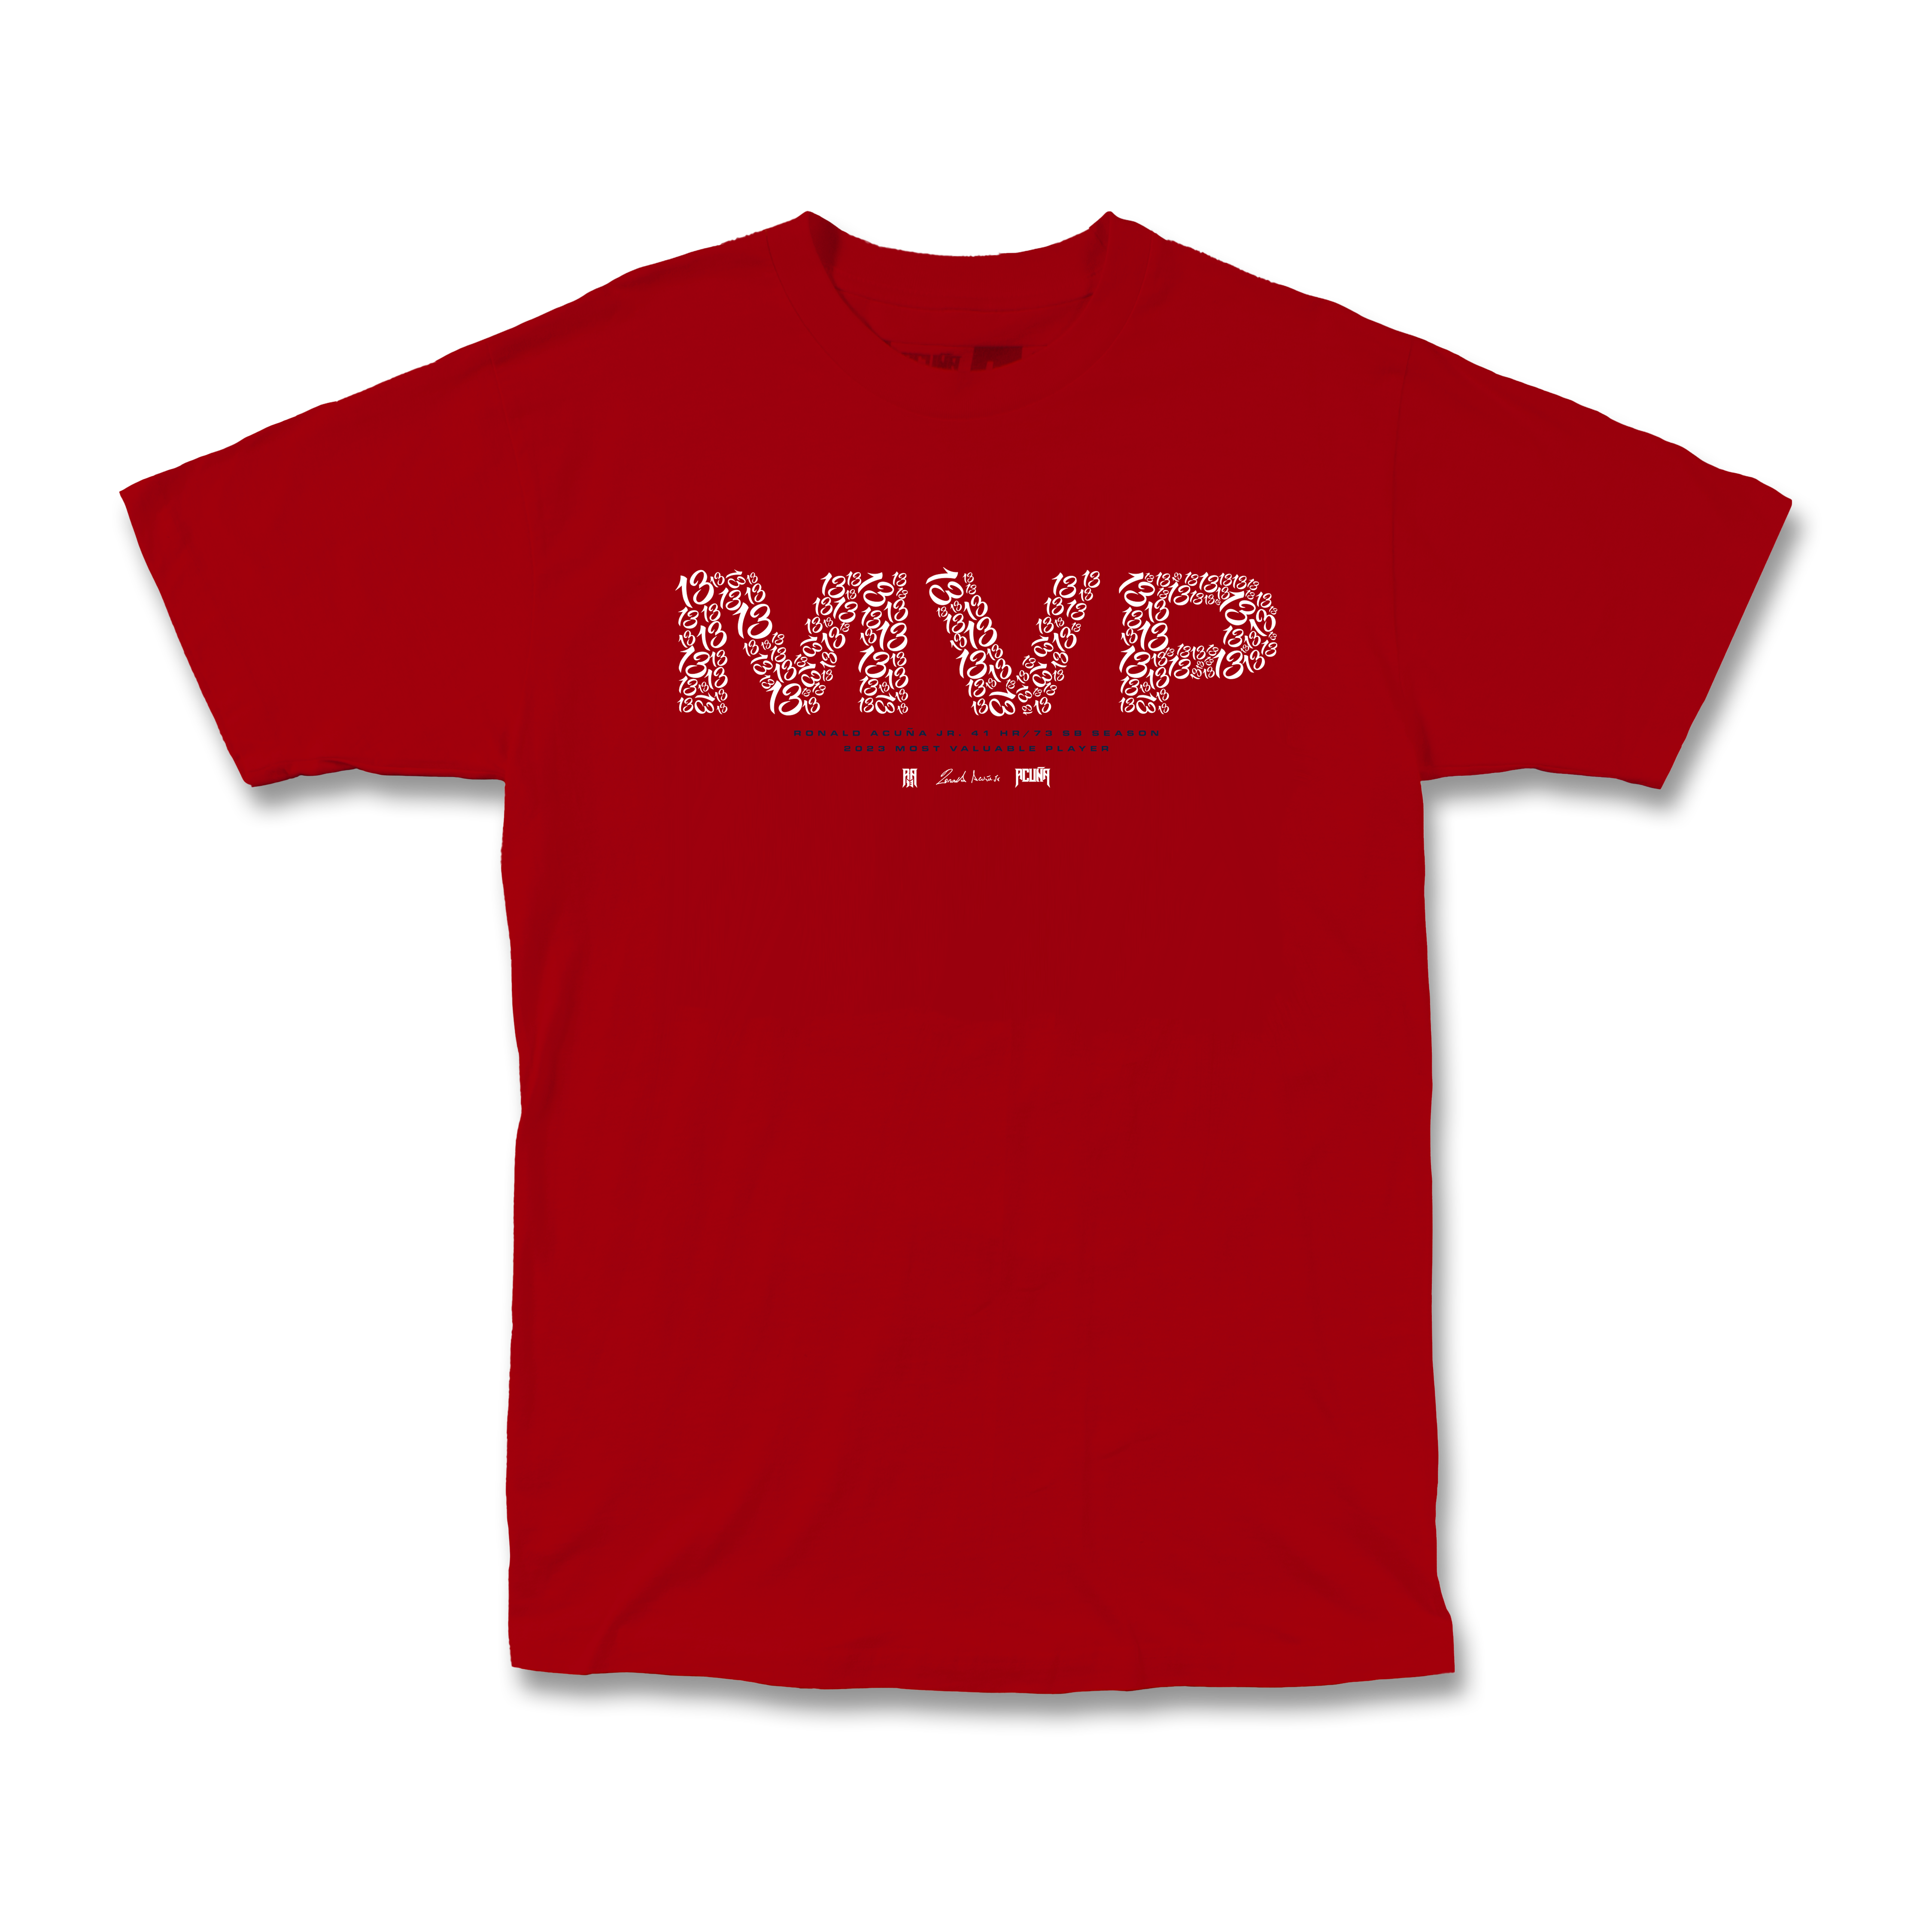 Front image of the Red crew neck shirt with short sleeves featuring MVP design printed in white